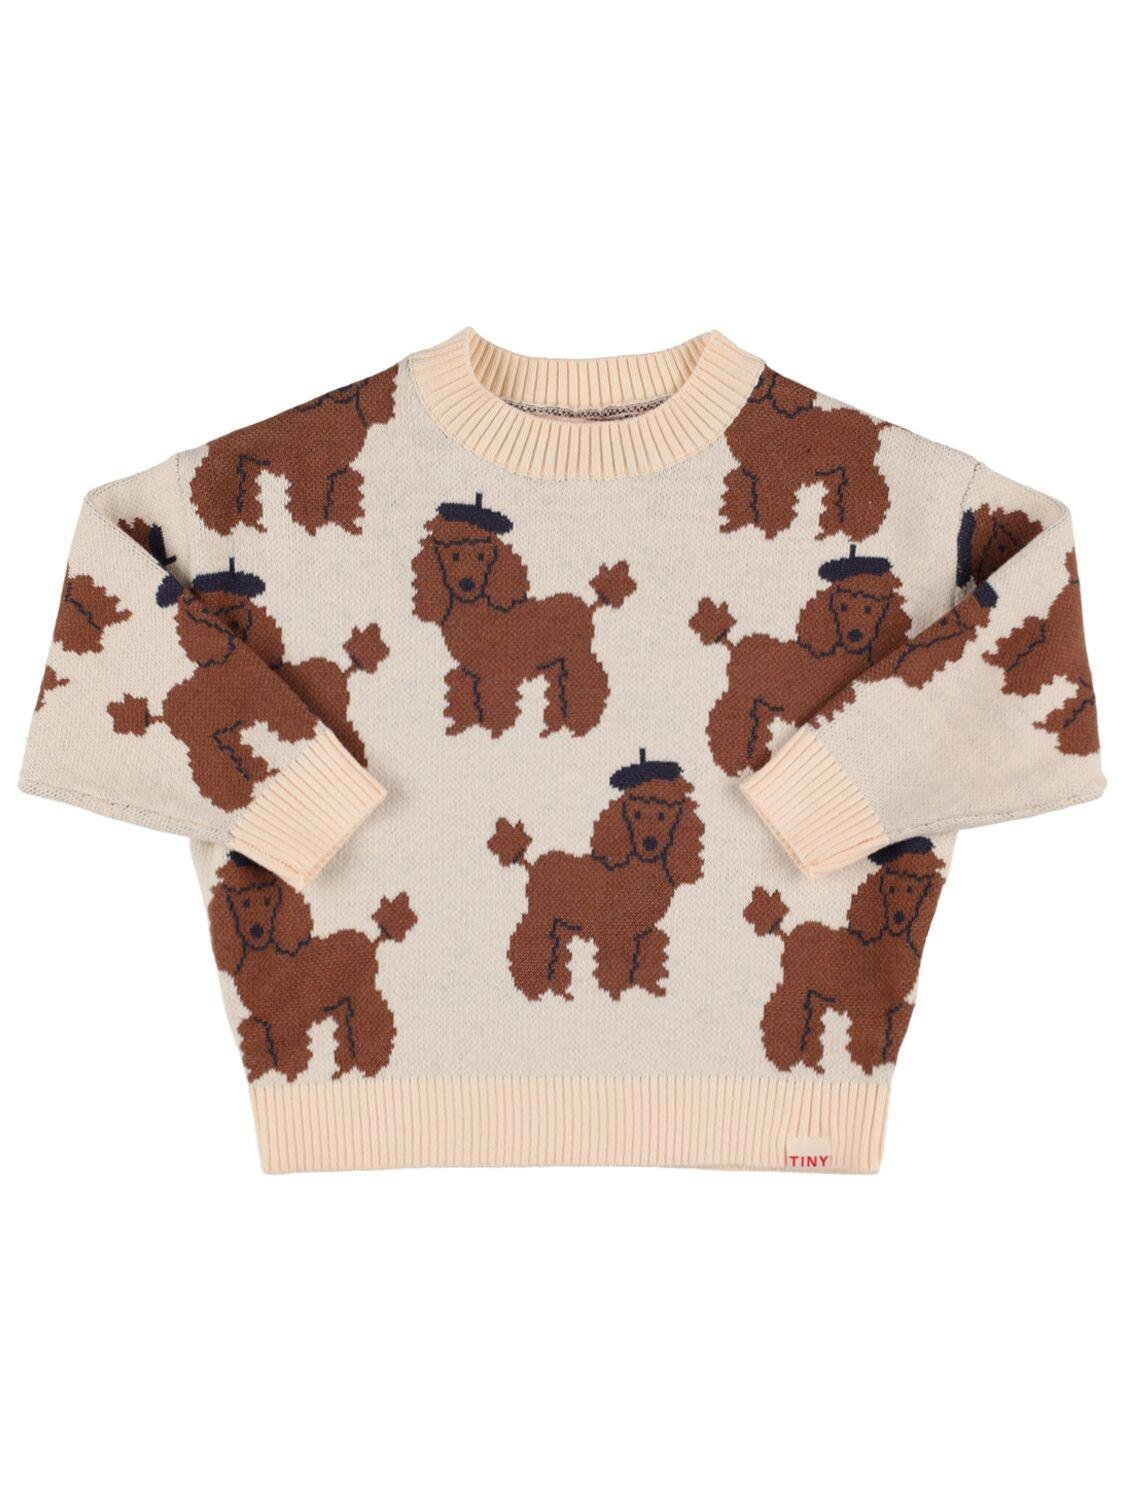 Poodle Intarsia Wool & Cotton Sweater by TINY COTTONS